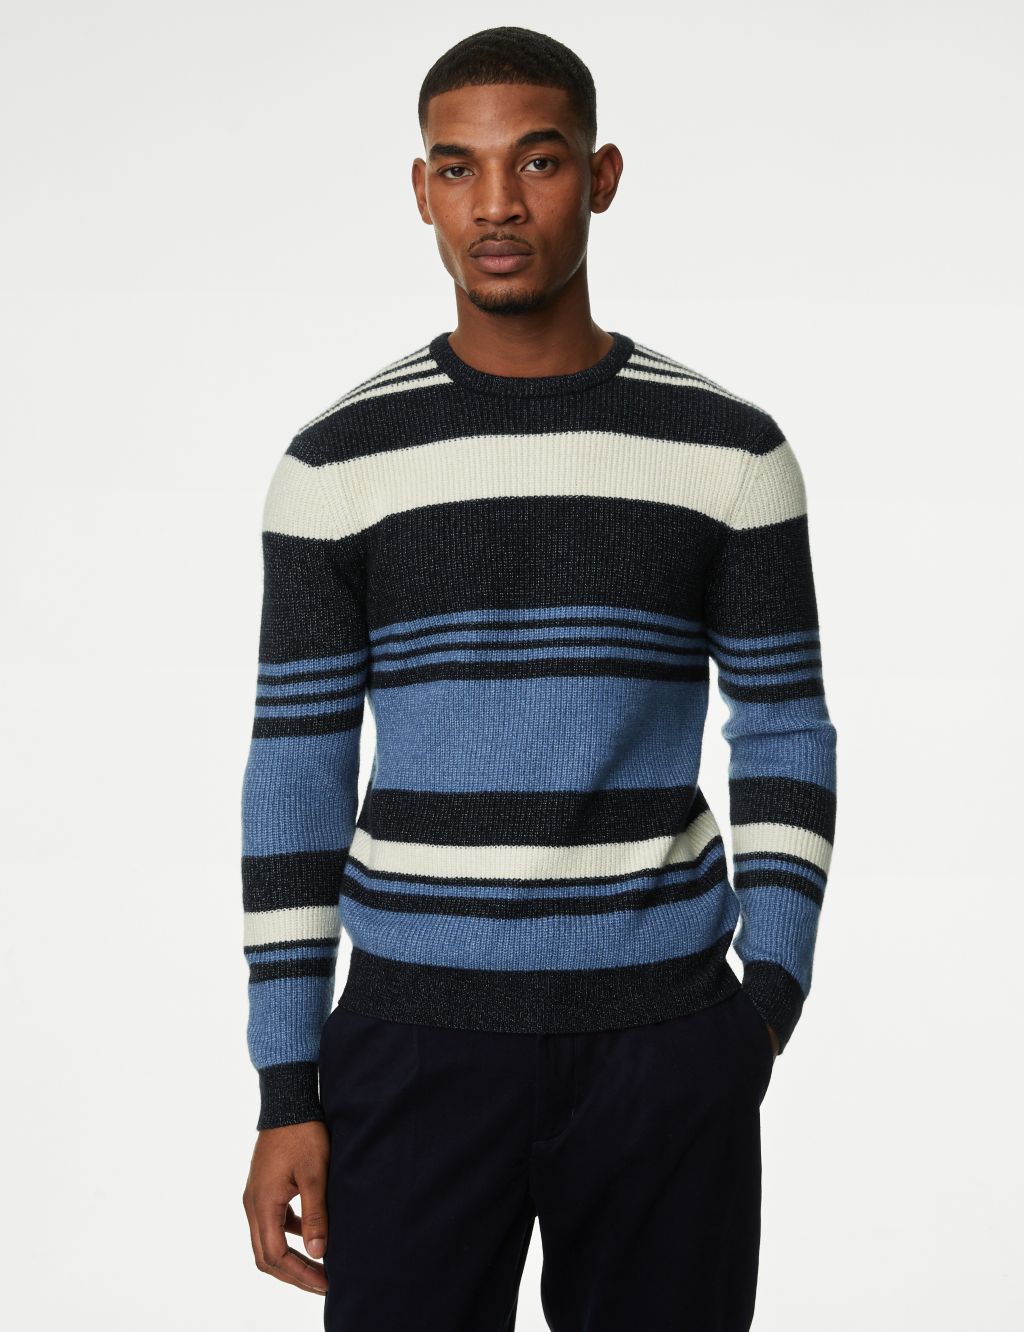 Supersoft Striped Chunky Crew Neck Jumper image 3